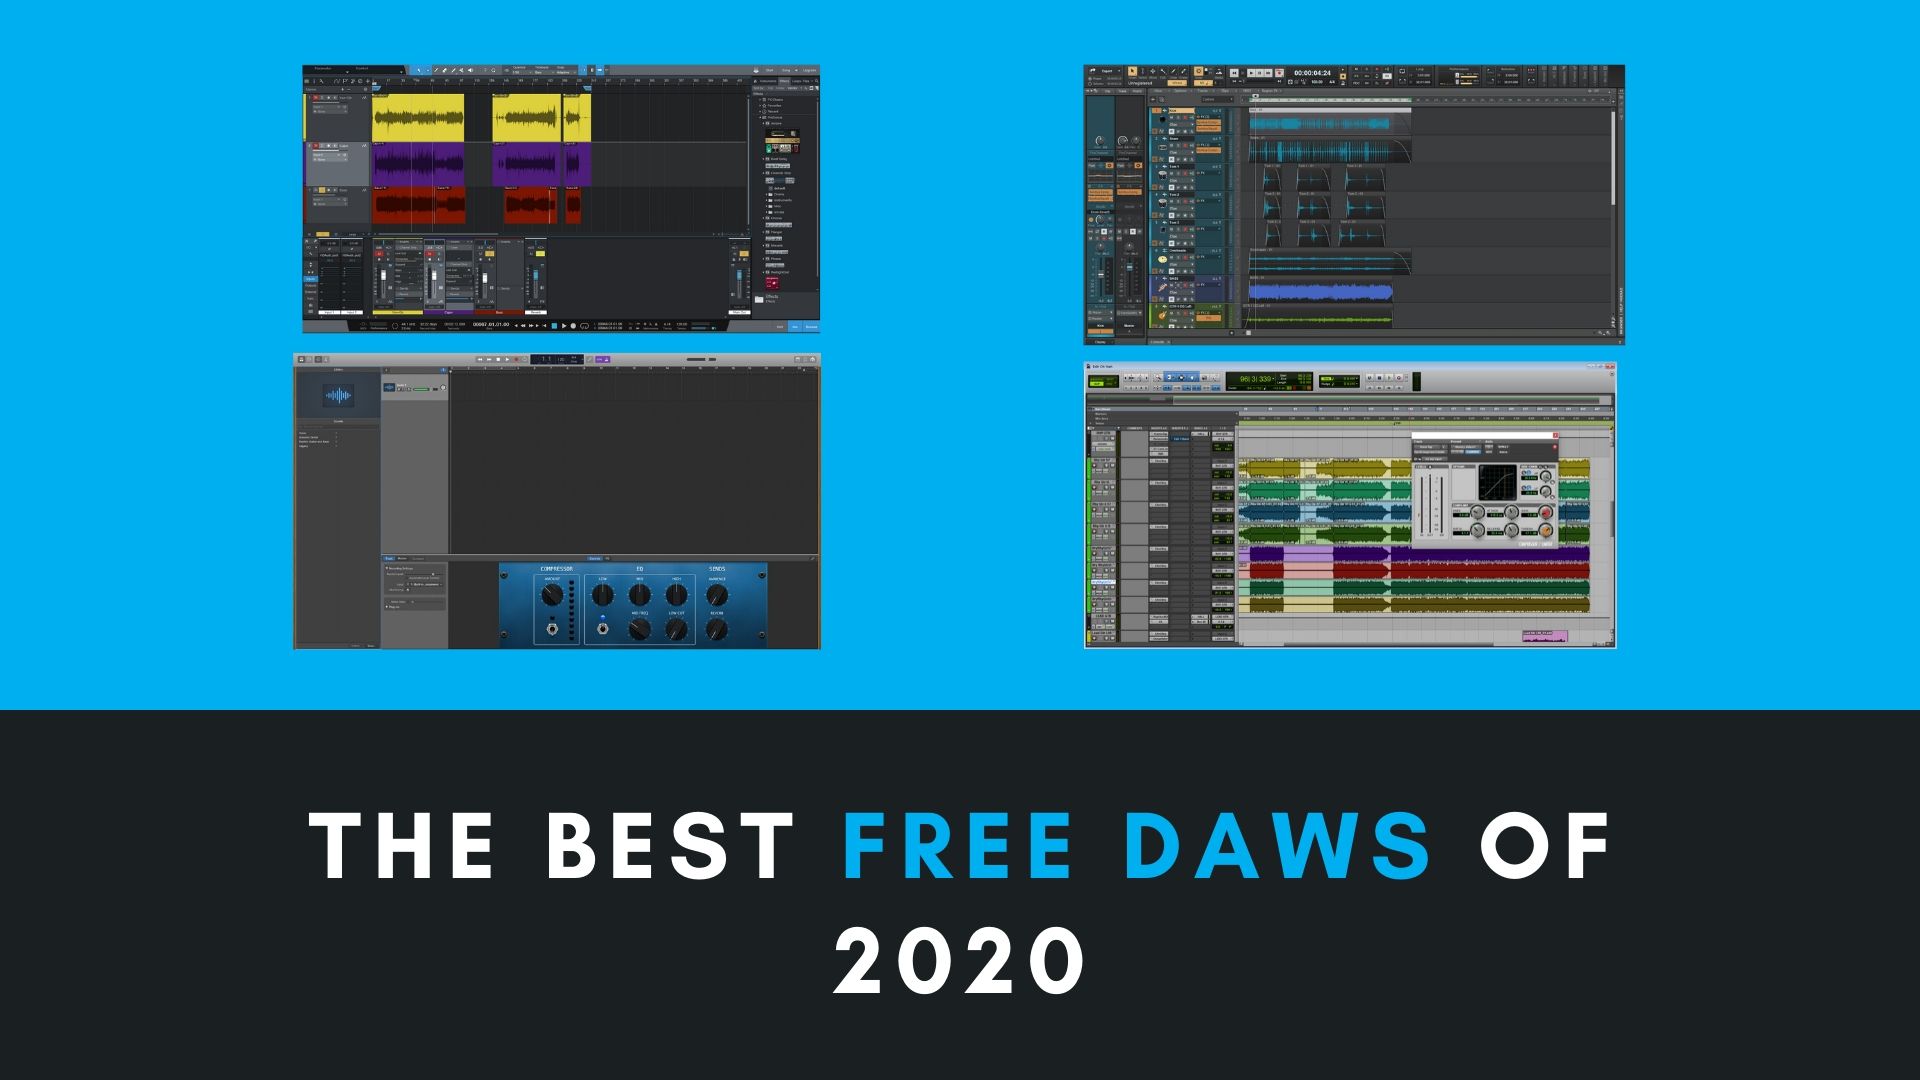 daws for music production